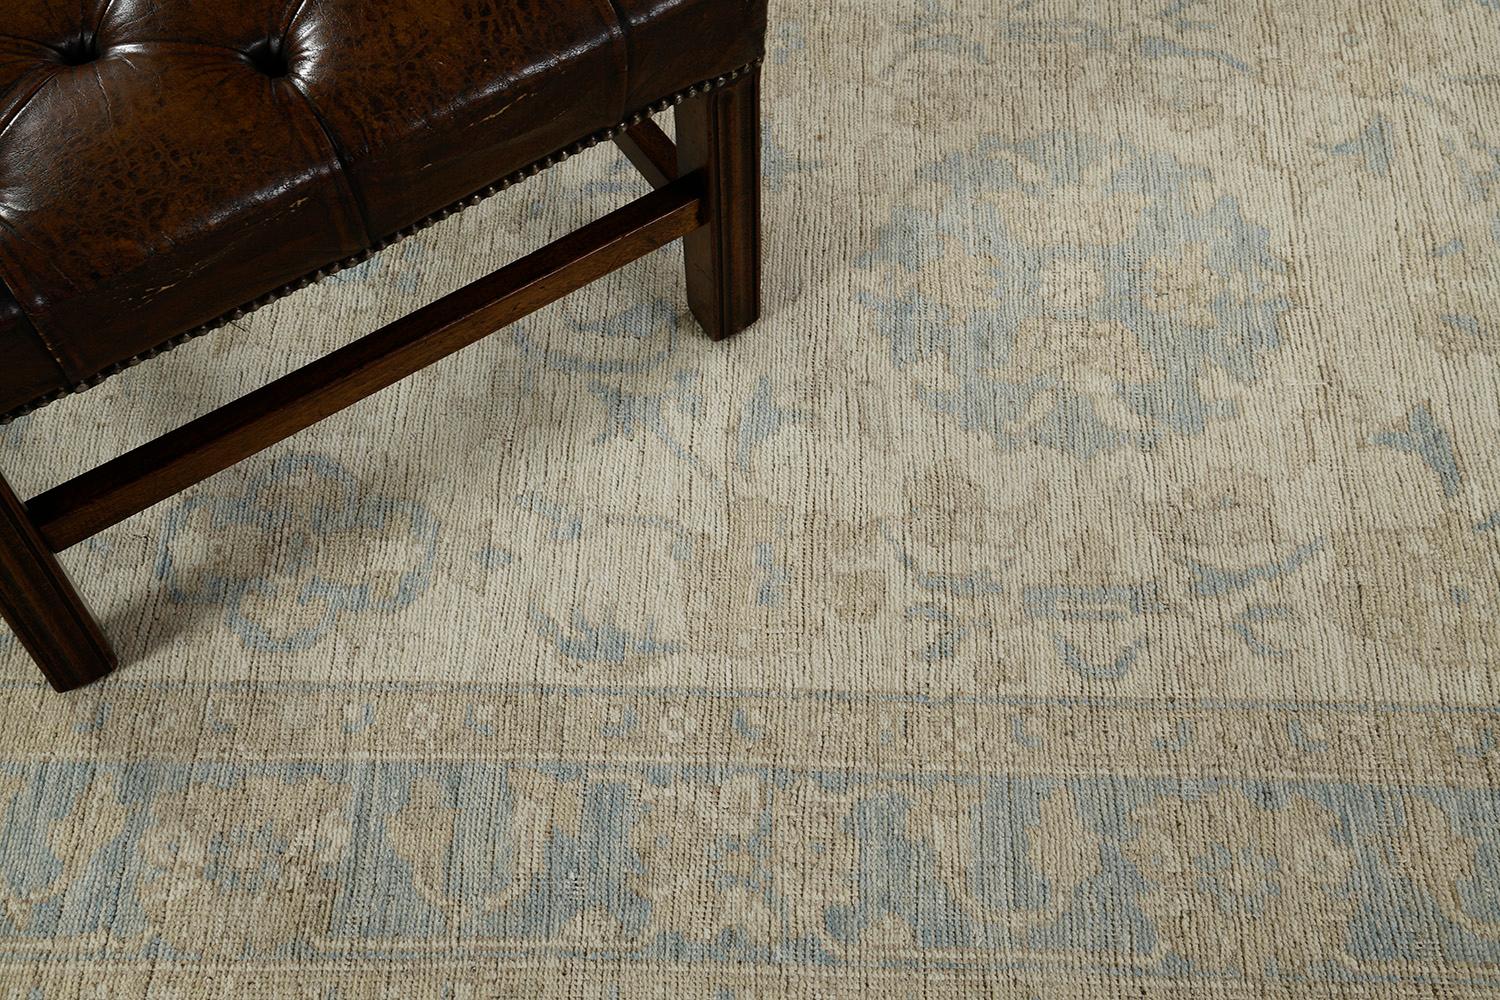 This enchanting Sultanabad Runner has symmetrical patterns that make the rug unique. A one of a kind rug that makes your interior more fascinating. Neutral tones feature even the smallest details of the patterns and motifs that match with the teal